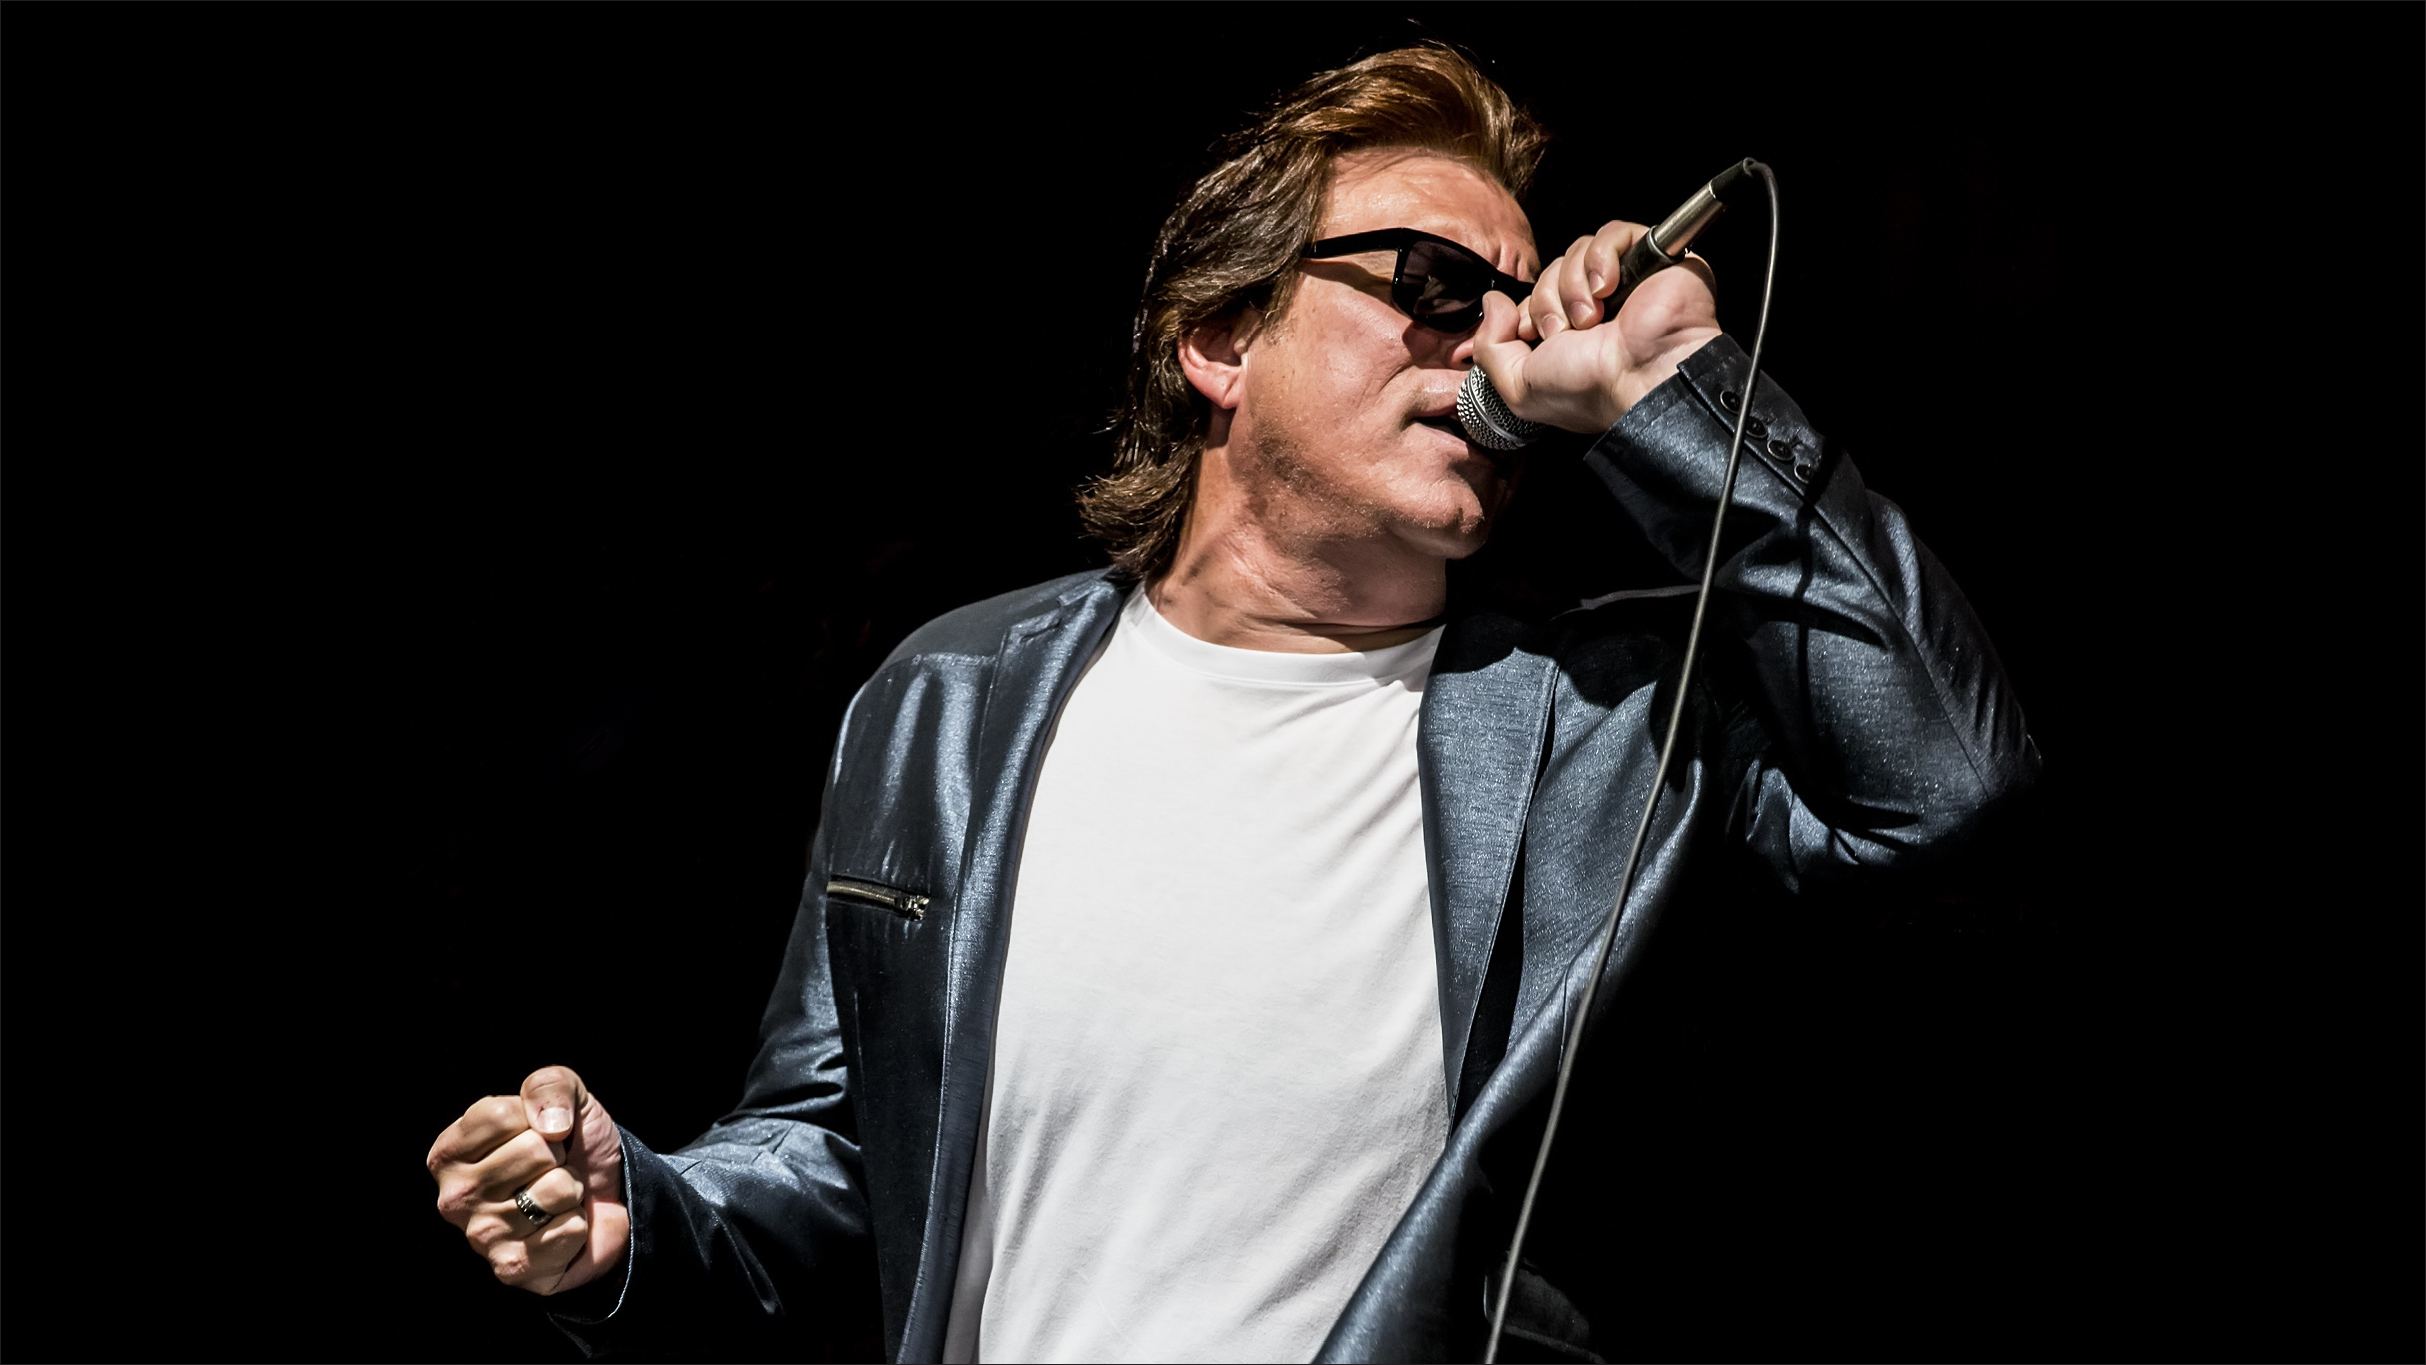 The Heart Of Rock & Roll - A Tribute To Huey Lewis & The News